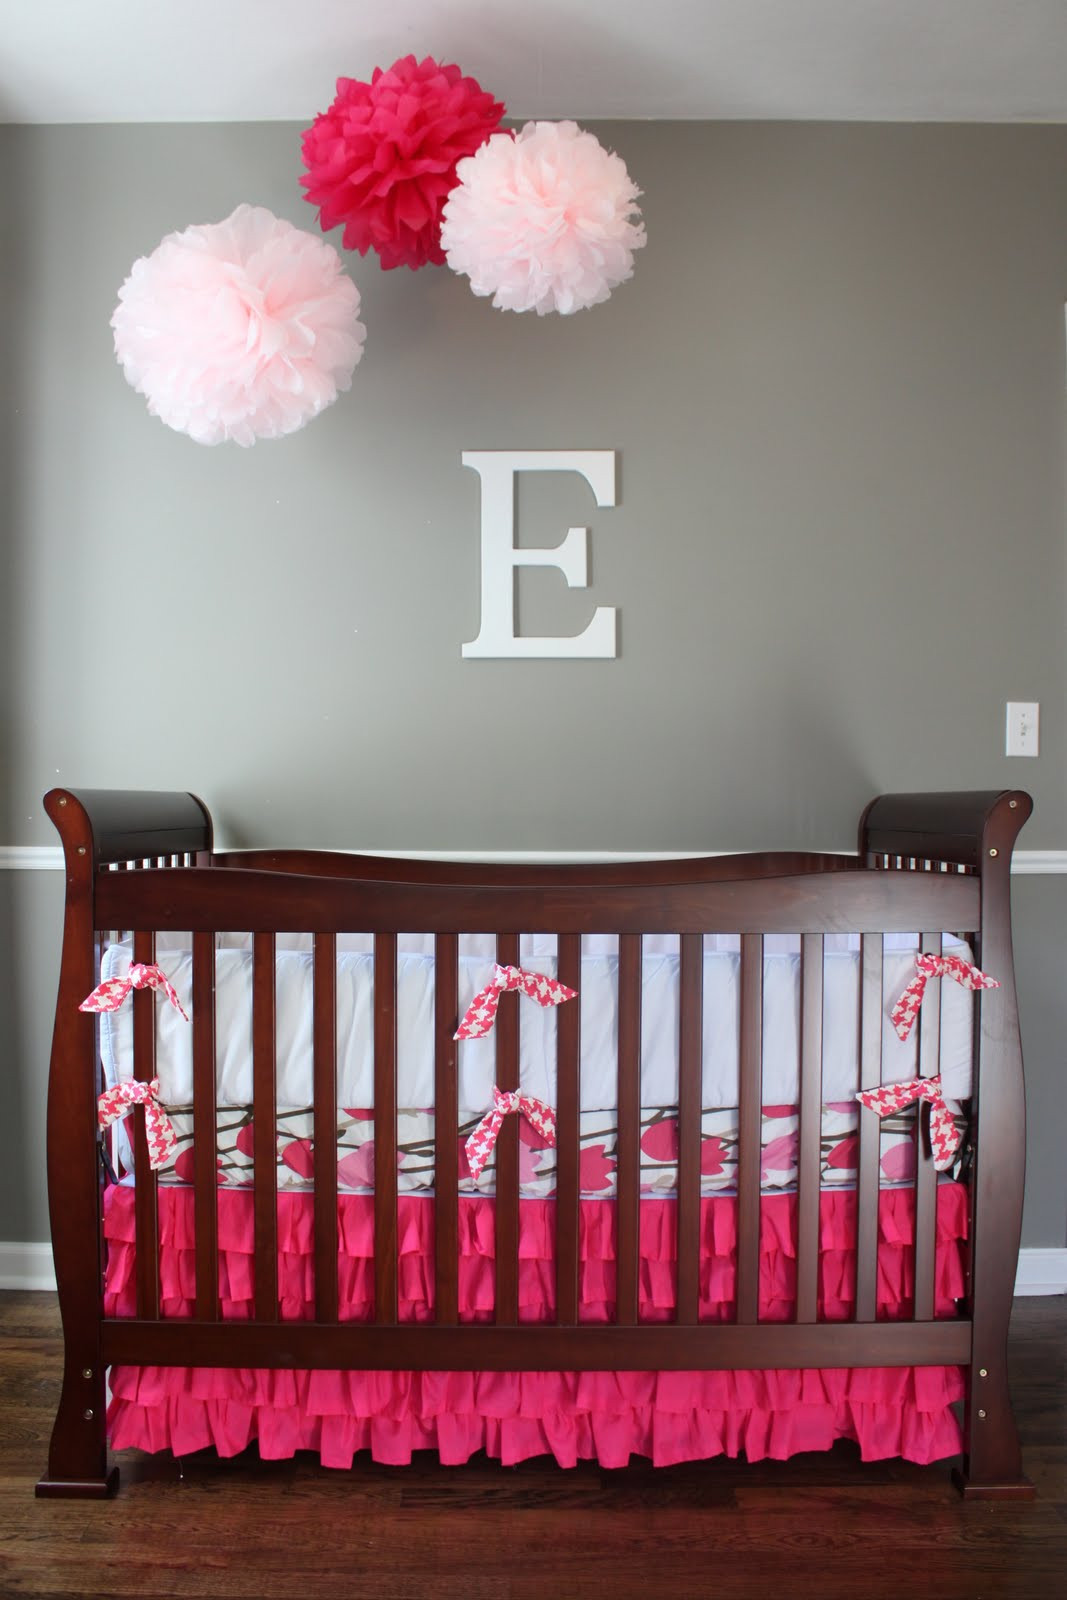 Baby Girl Nursery Decor
 simple sage designs Check This Out Baby Girl Nursery